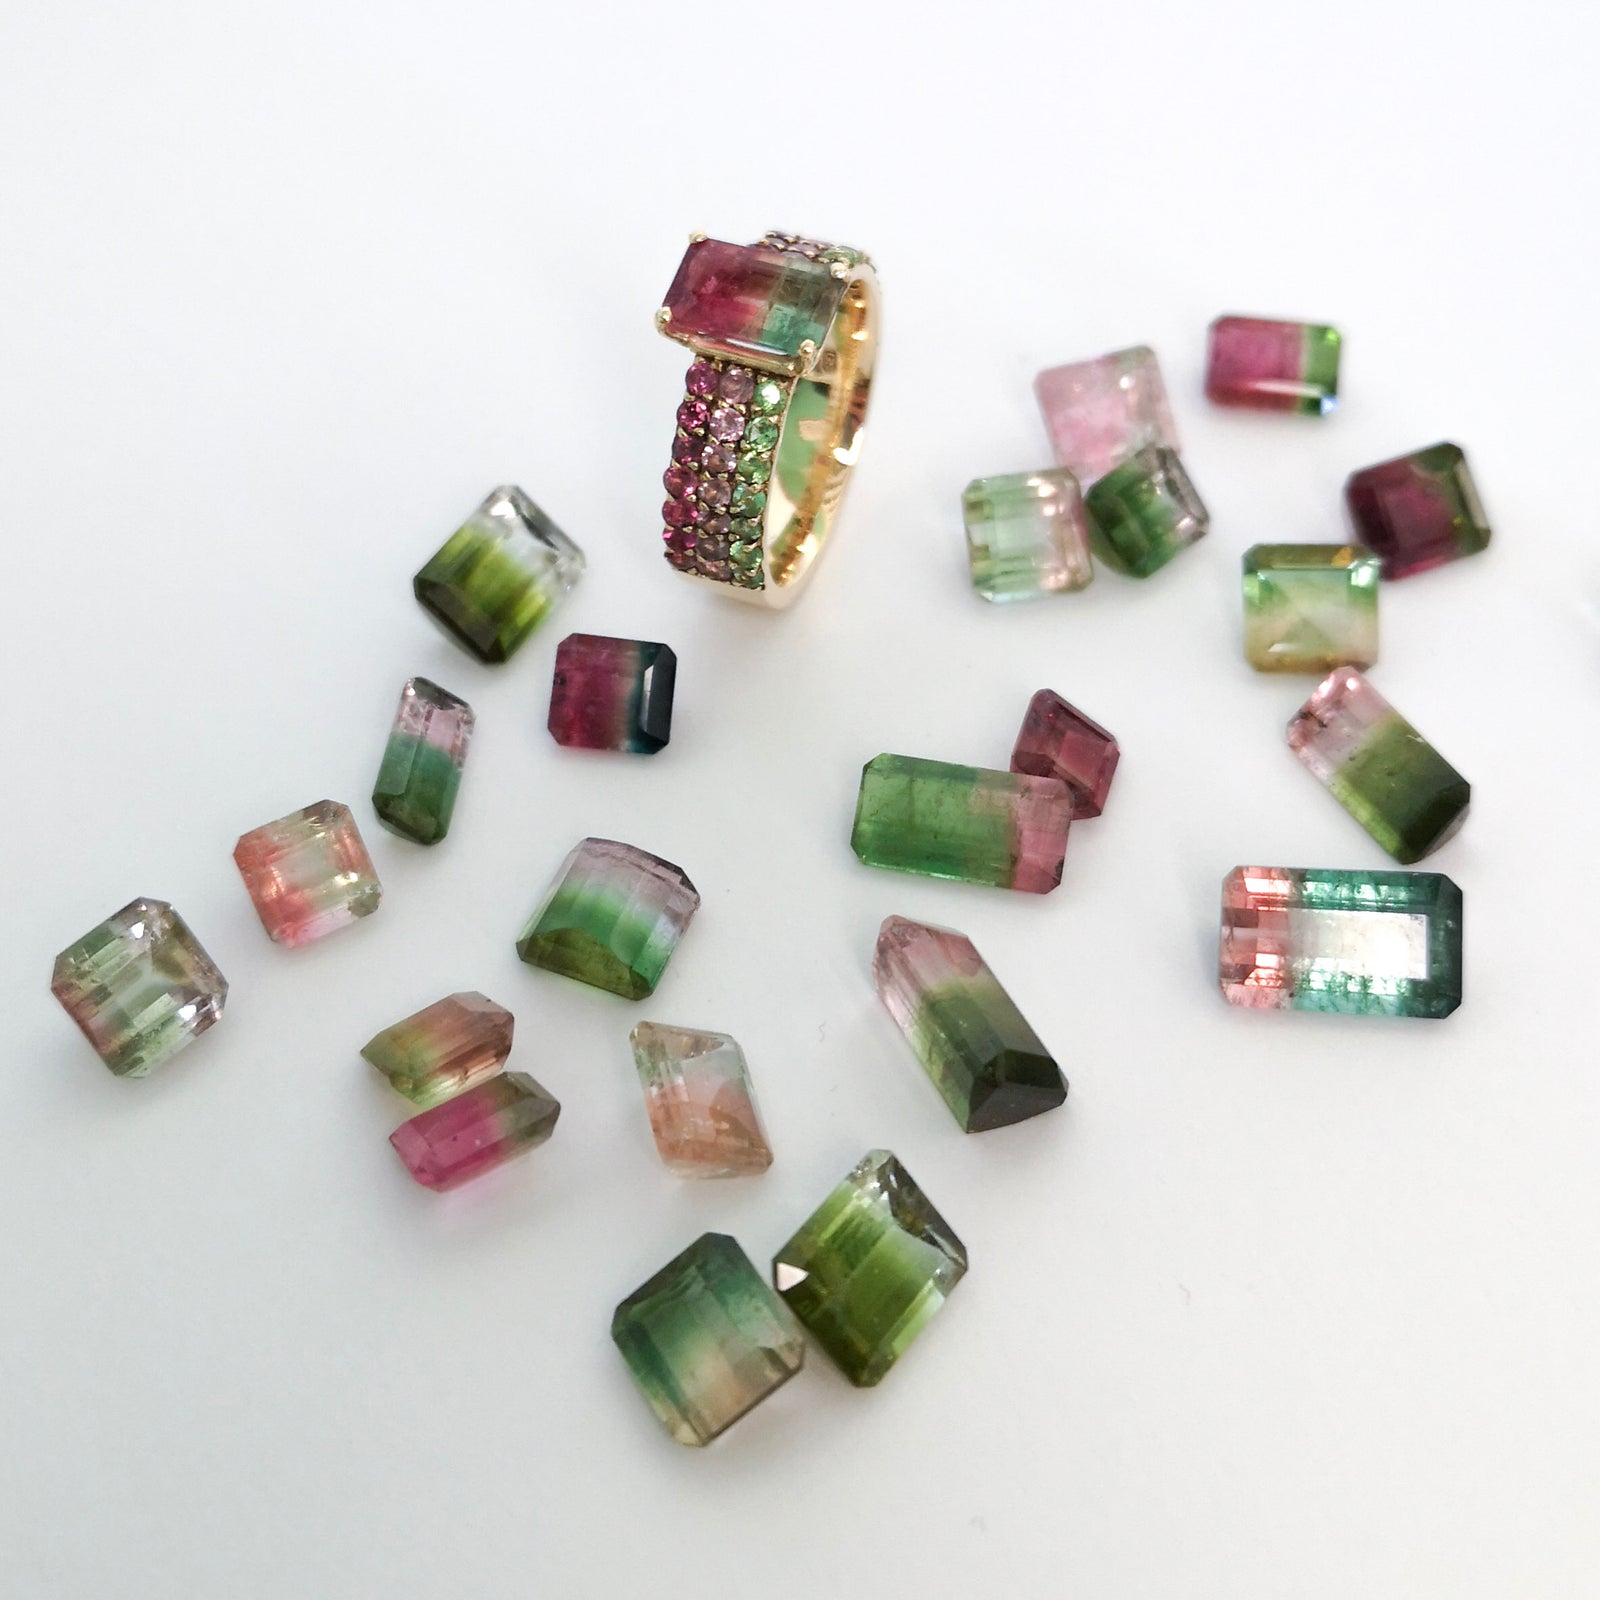 wateremelon_sugar_ring_surrounded_by_watermelon_tourmaline_stones